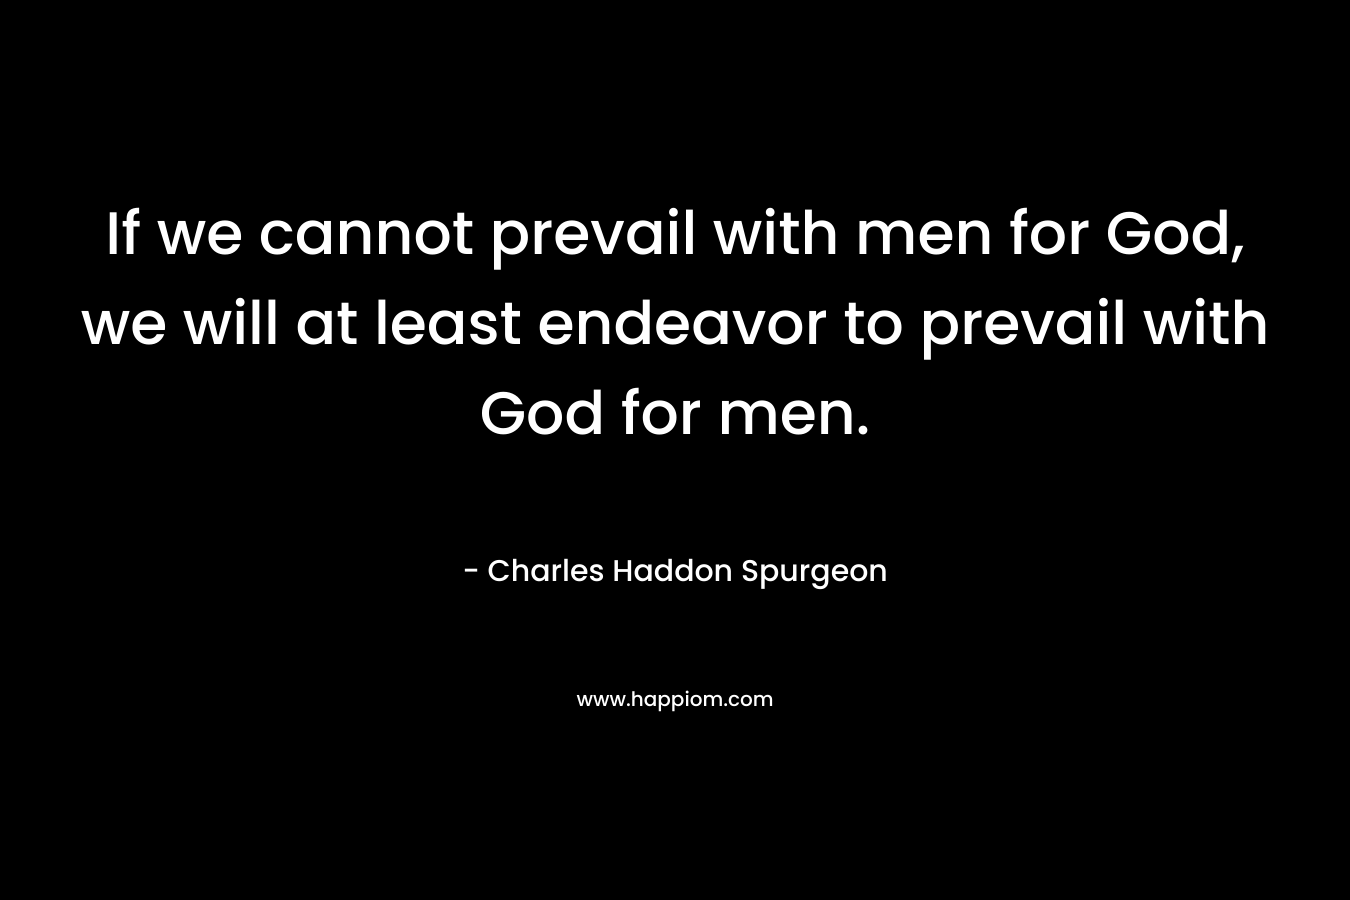 If we cannot prevail with men for God, we will at least endeavor to prevail with God for men.